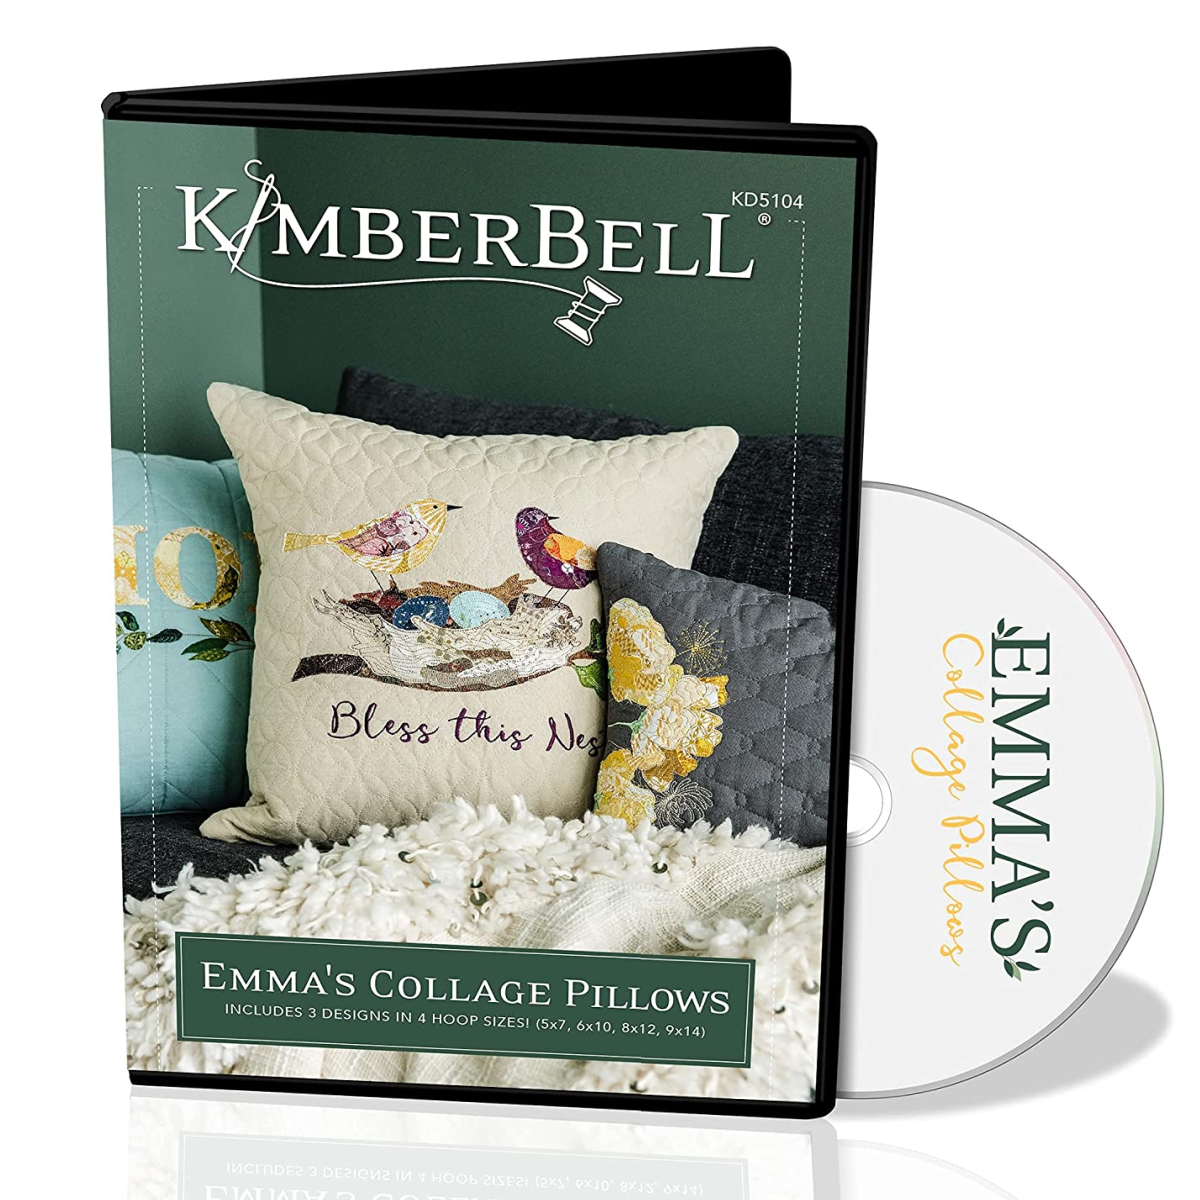 EMMA'S COLLAGE PILLOWS